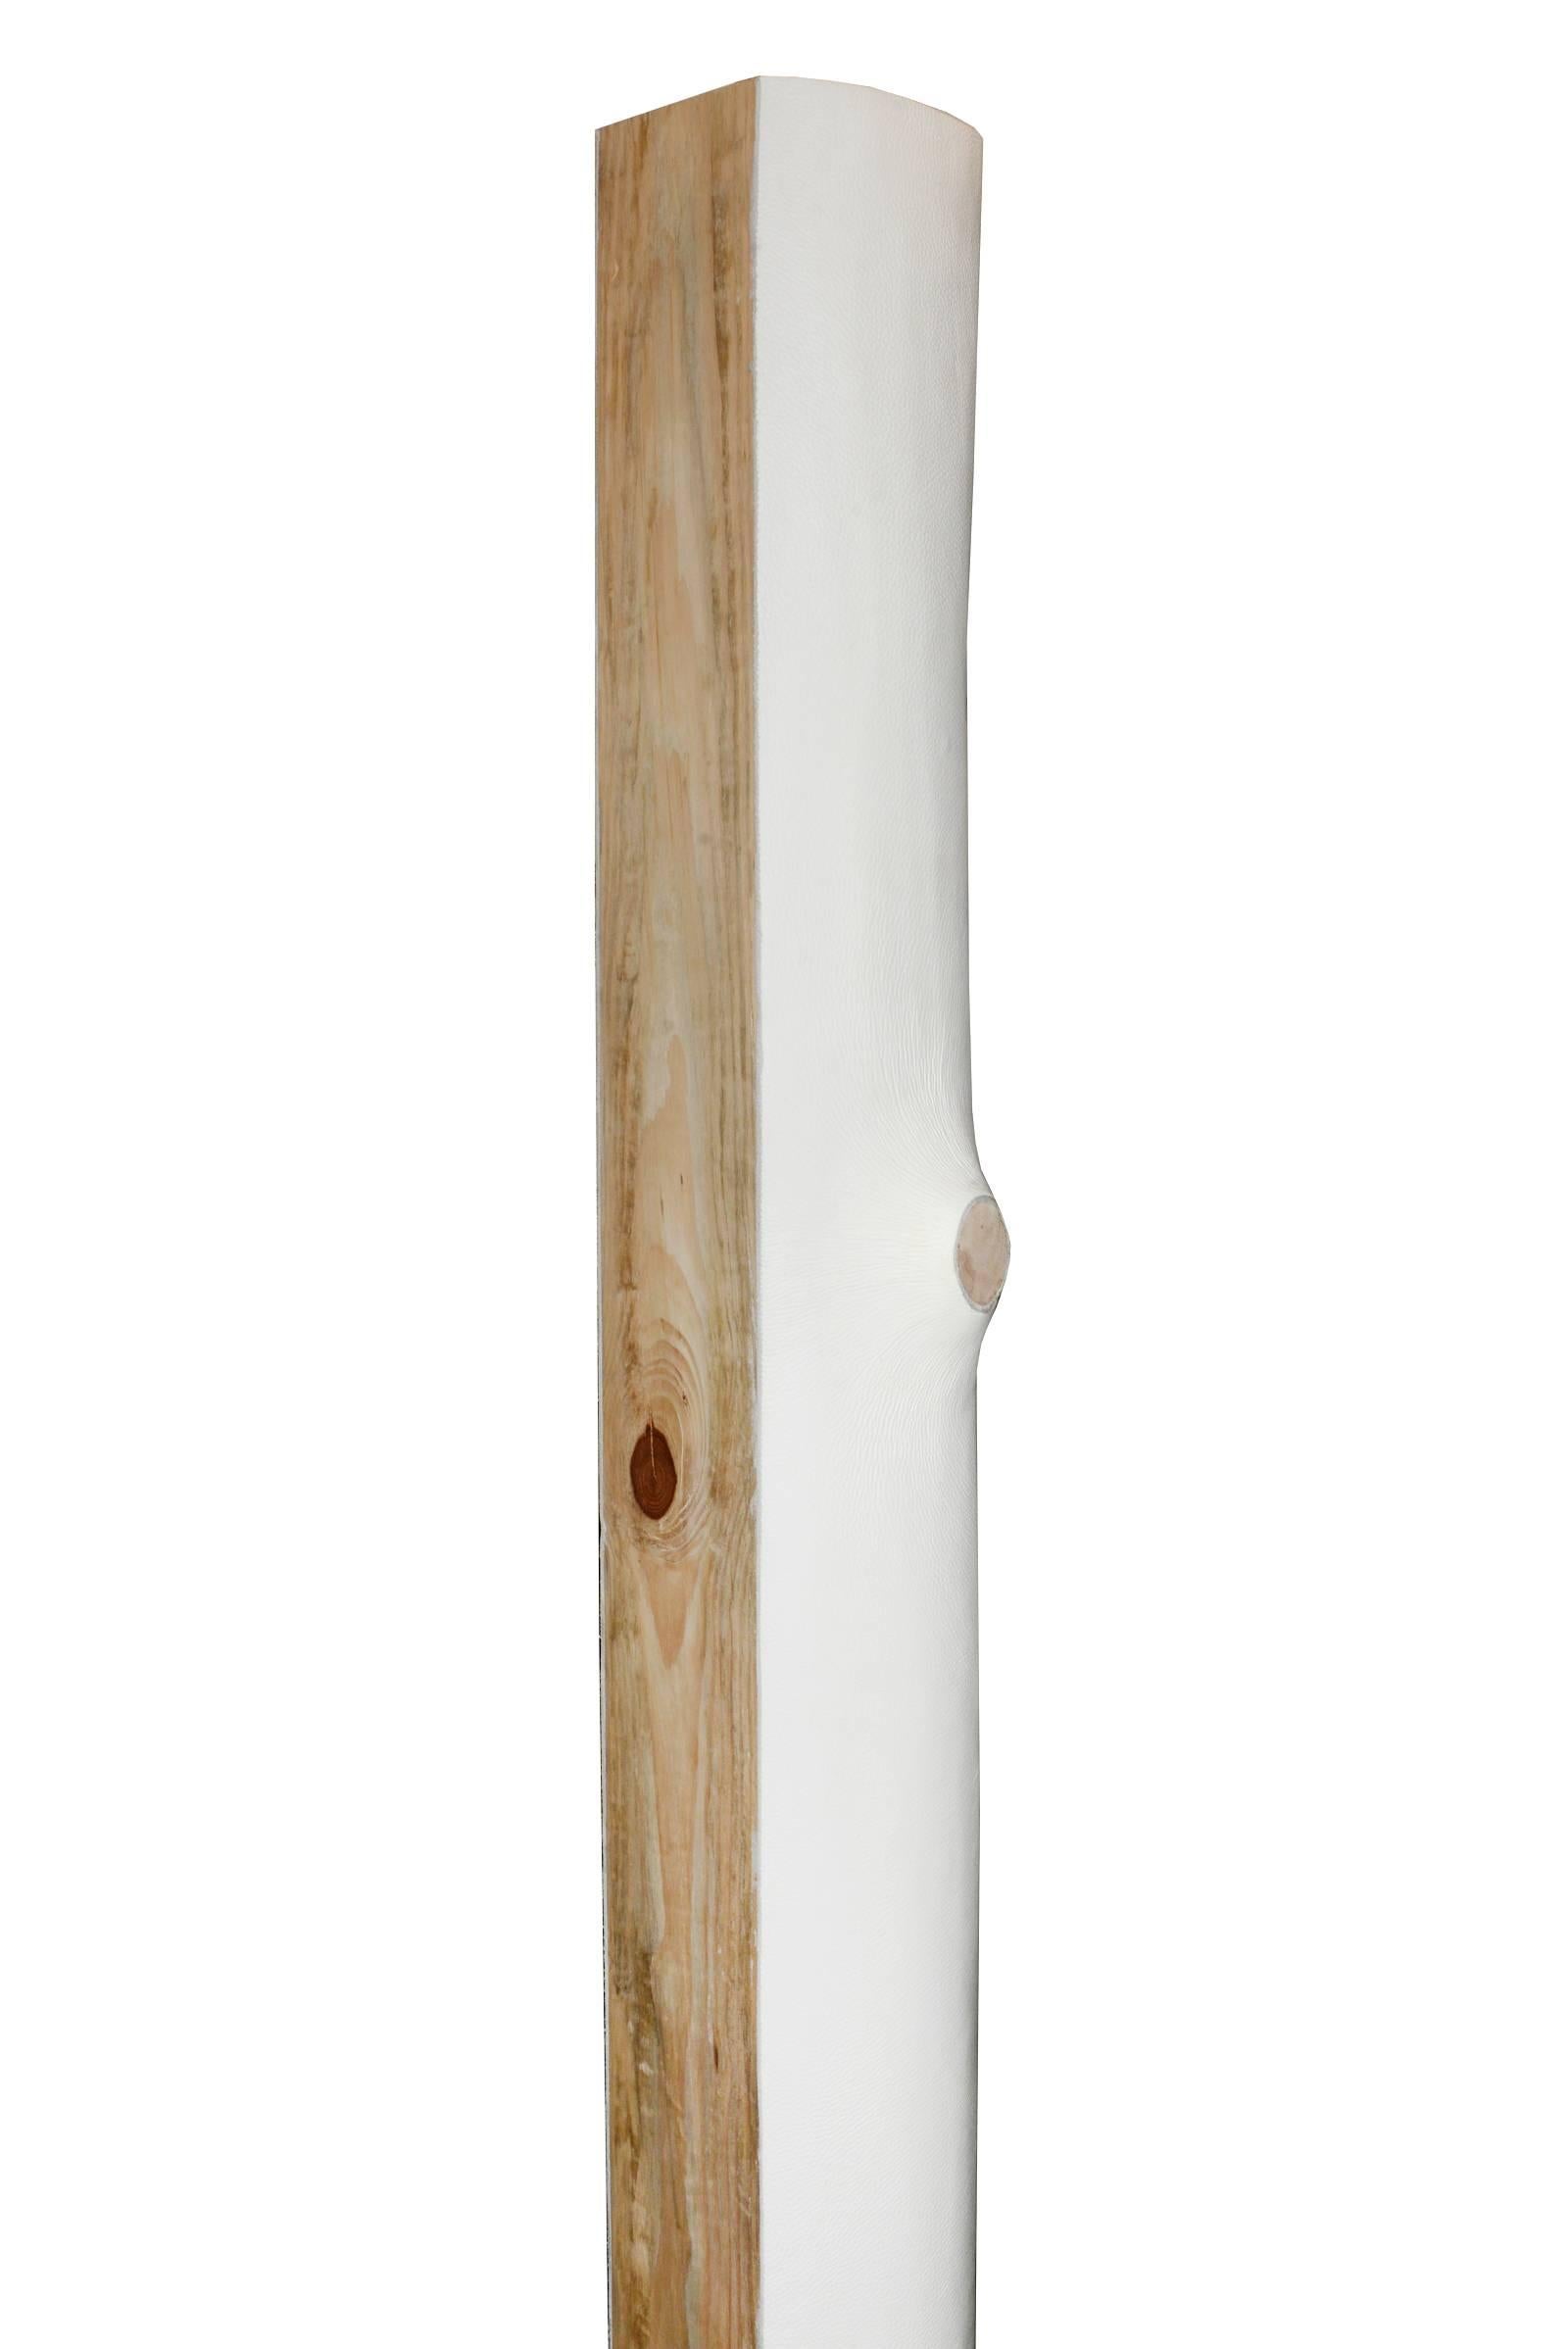 Contemporary White Leather Trunk Floor Lamp For Sale